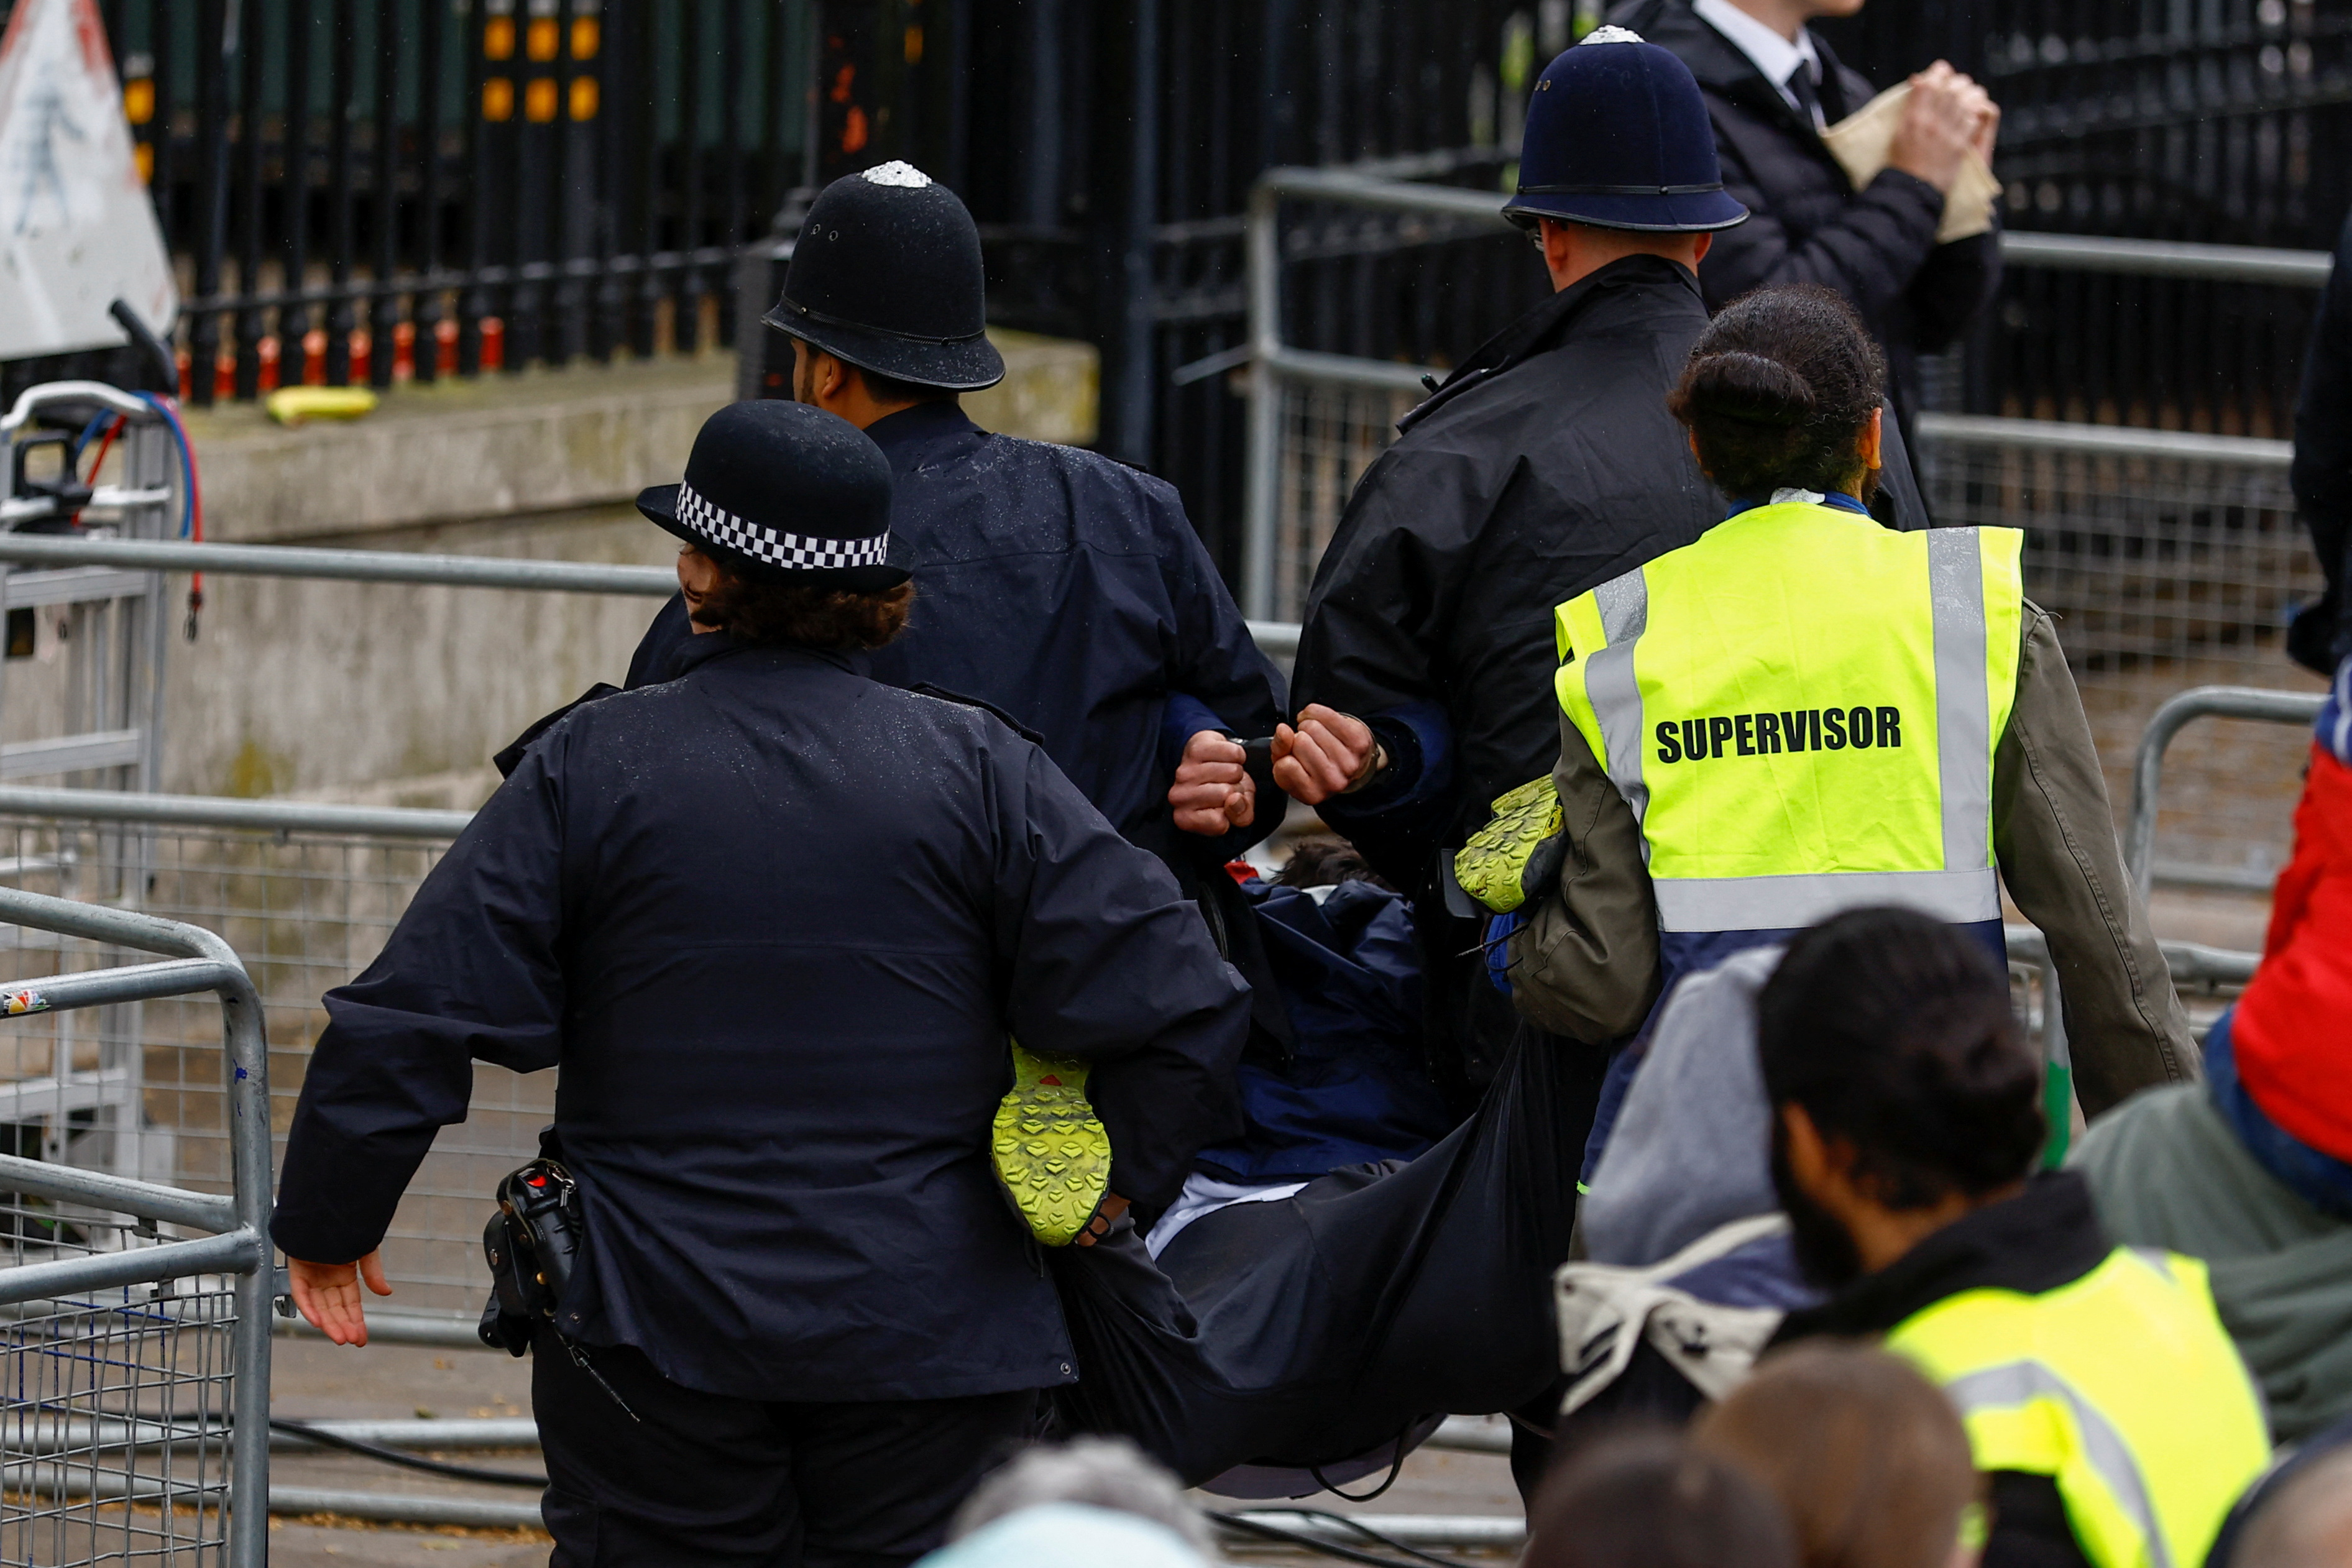 Police detain a protester on the day of the coronation in London. /Andrew Boyers/Reuters